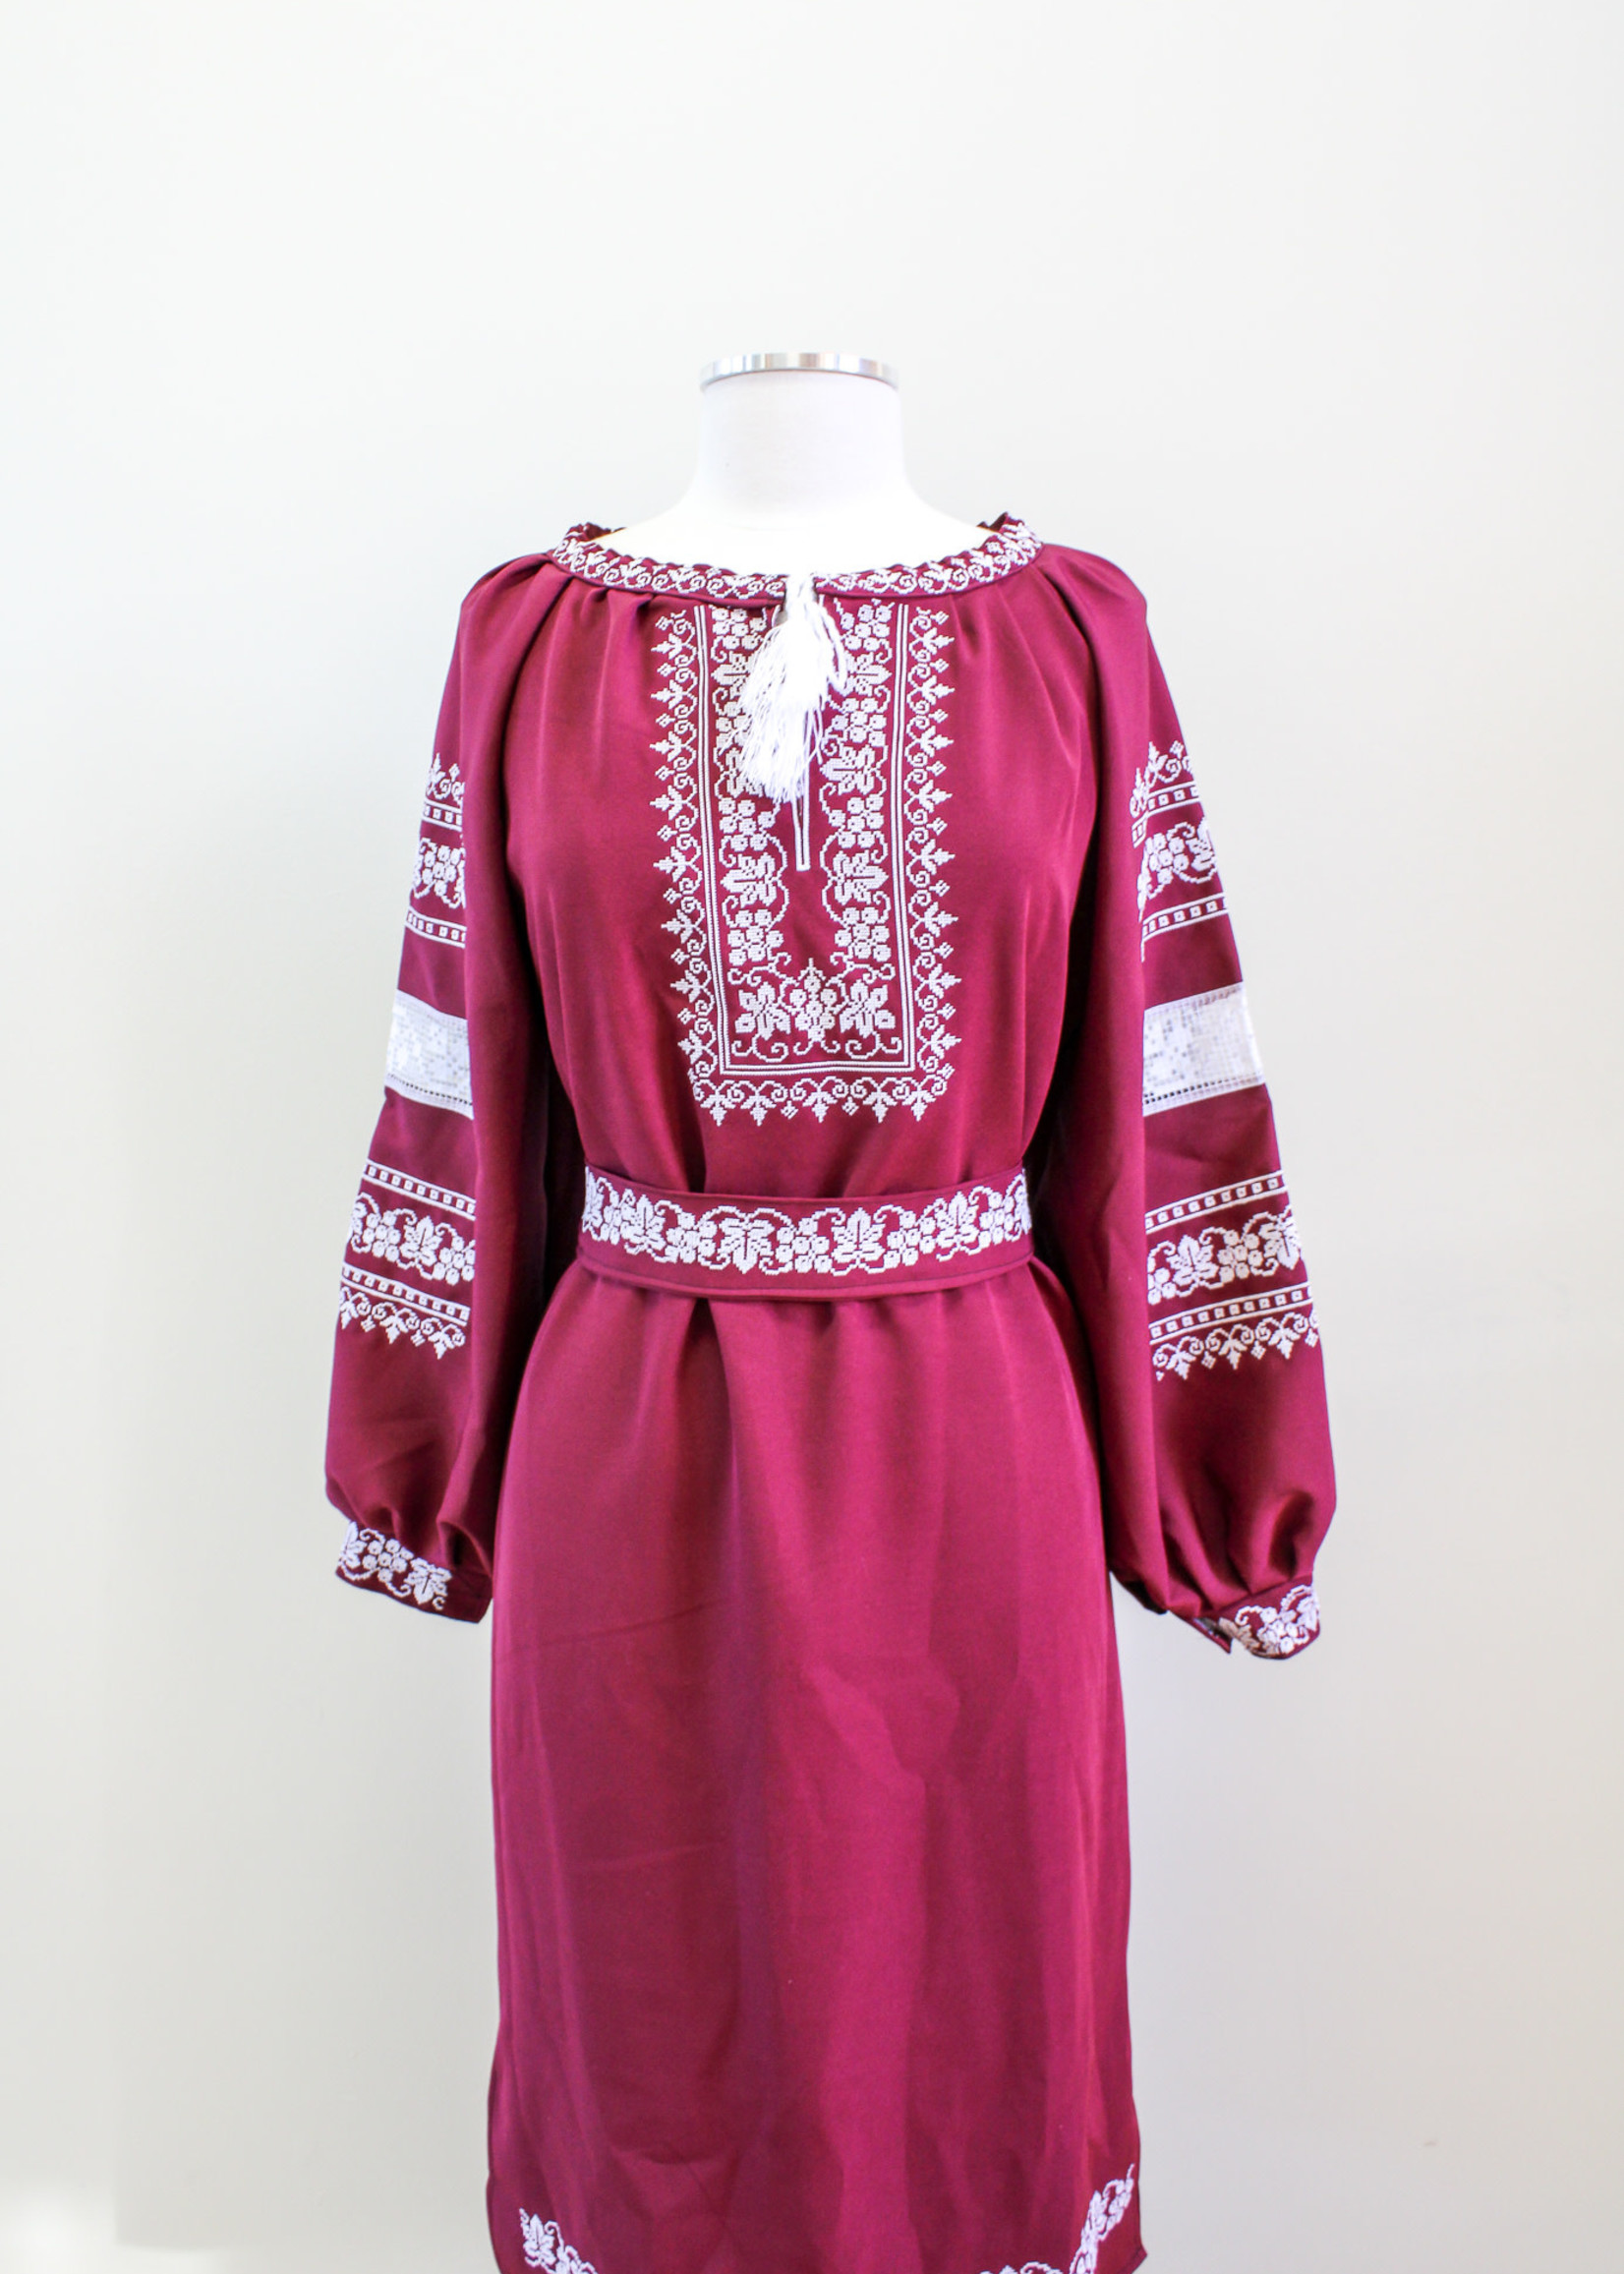 DRESS - (W) with White Embroidery